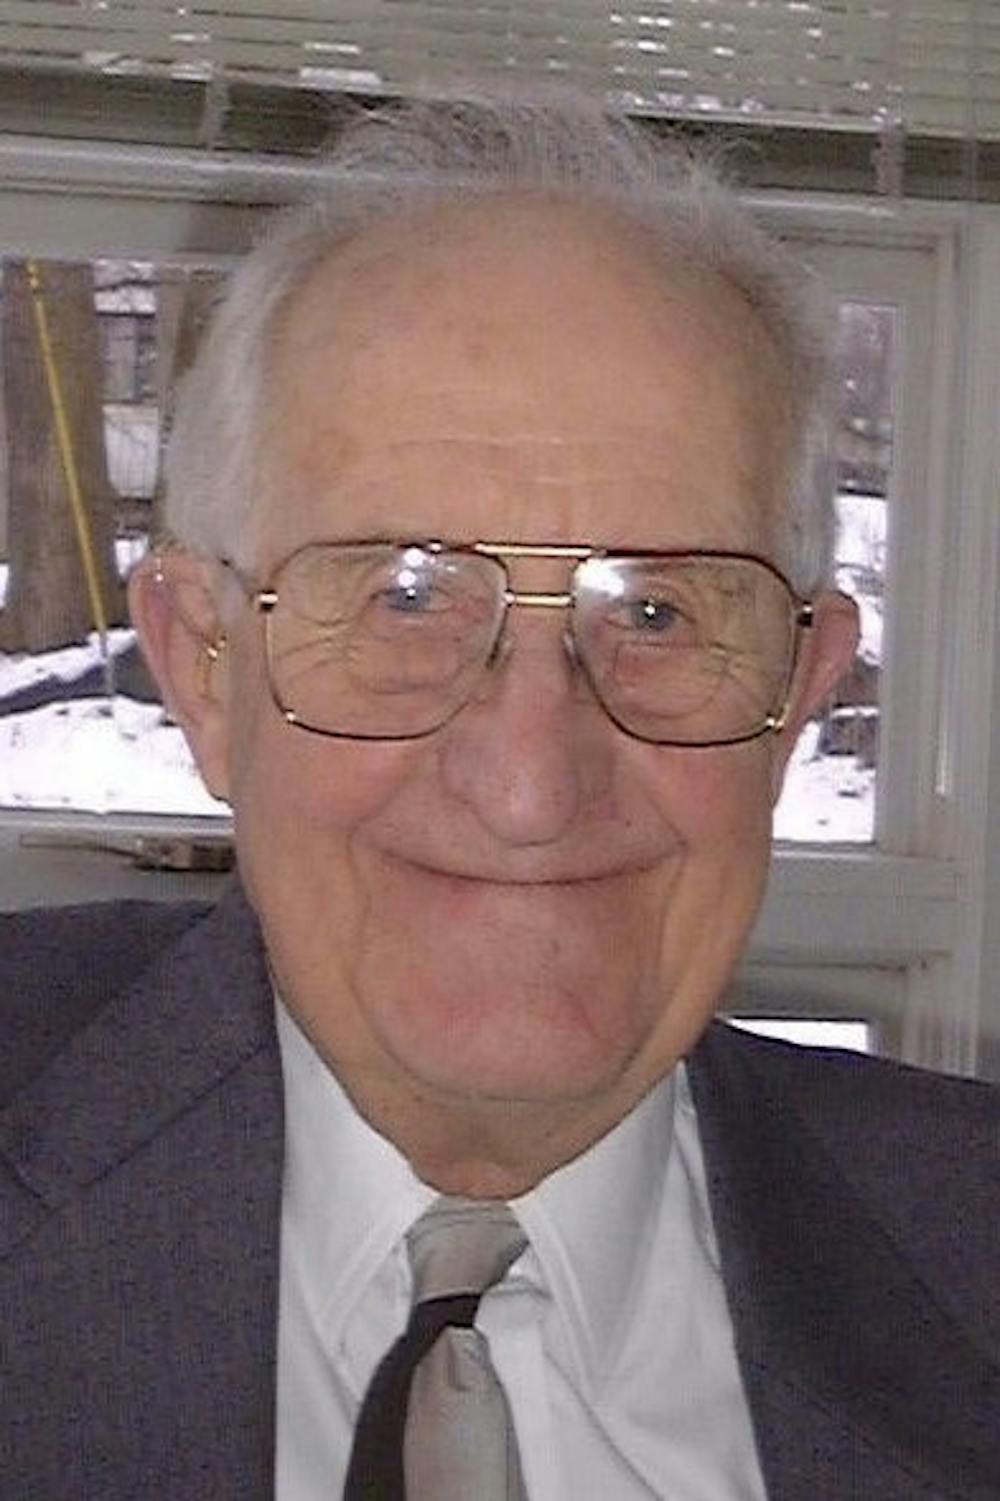 UW-Madison Professor Emeritus Jack Fowler died Dec. 1 at the age of 91. He taught human oncology and medical physics at the university for 12 years.